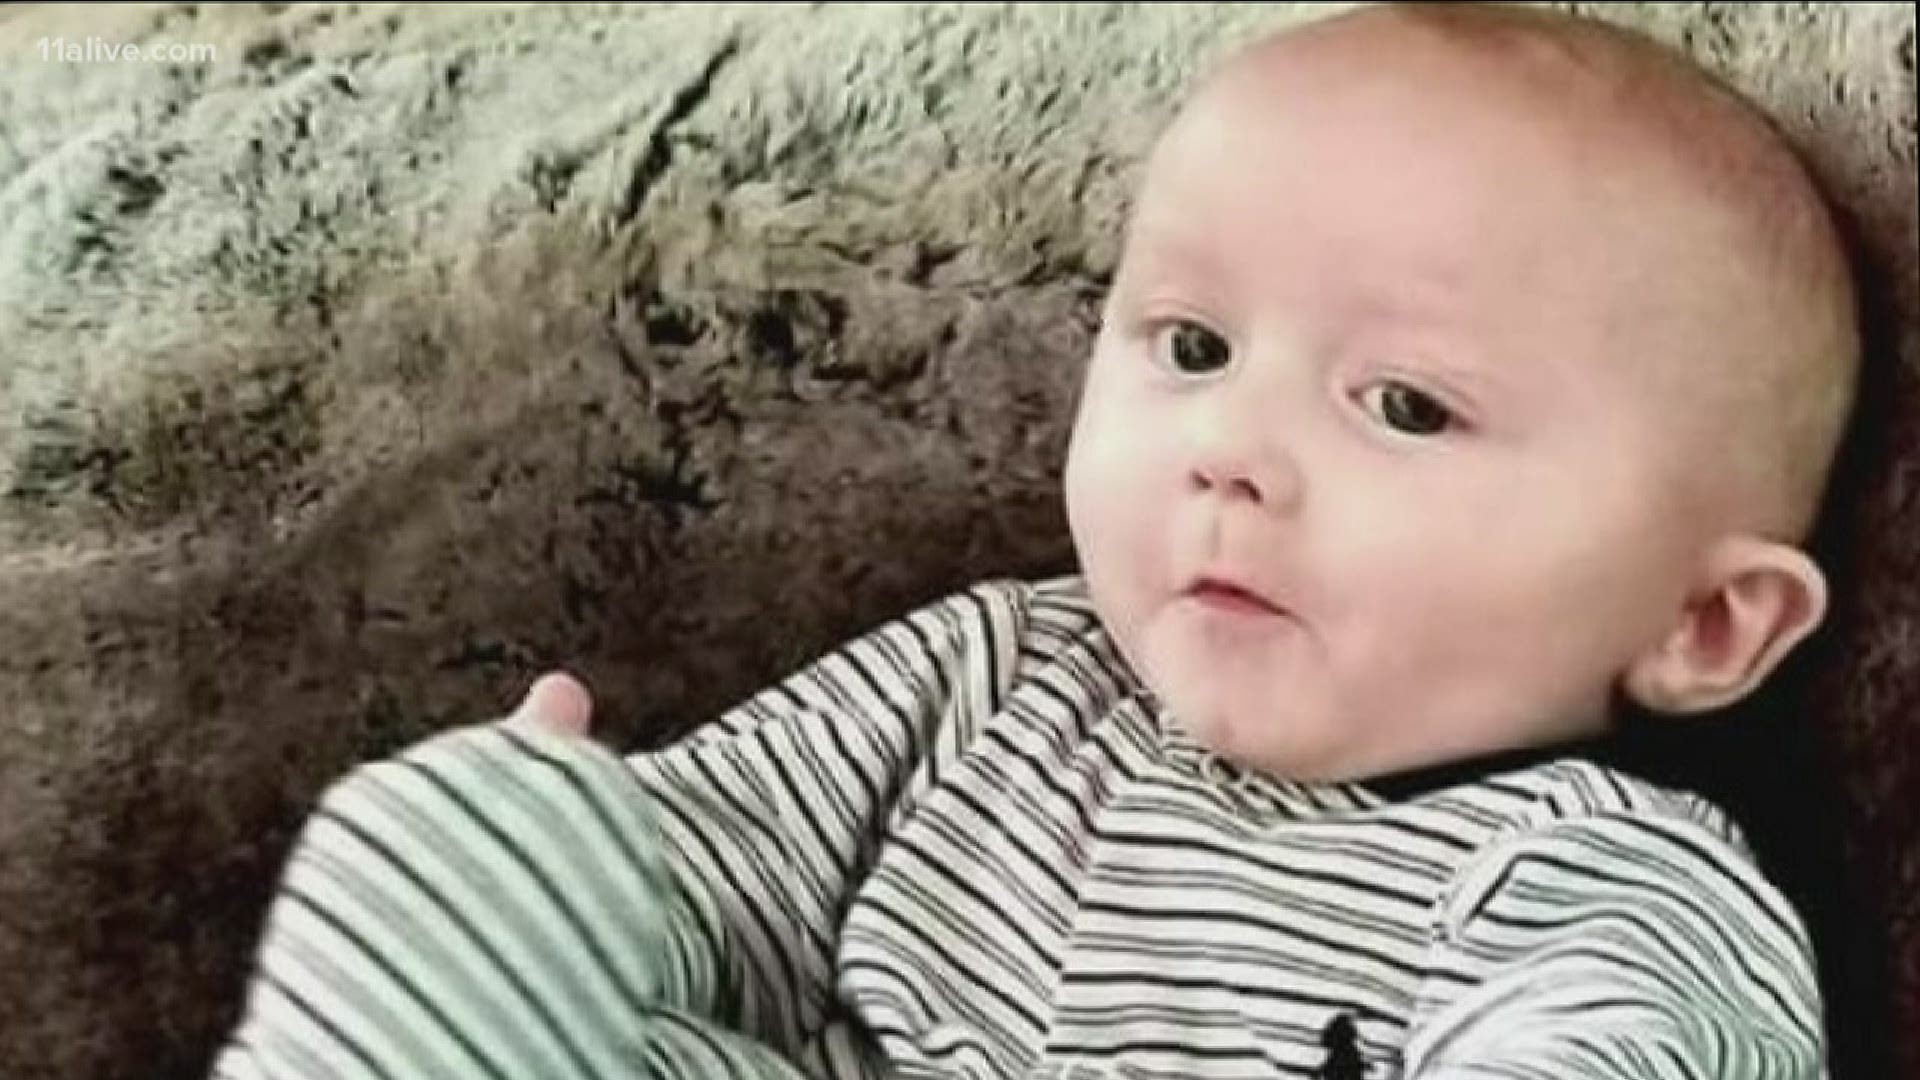 Family of 7-month-old who needs heart surgery struggling in the midst of COVID-19 pandemic